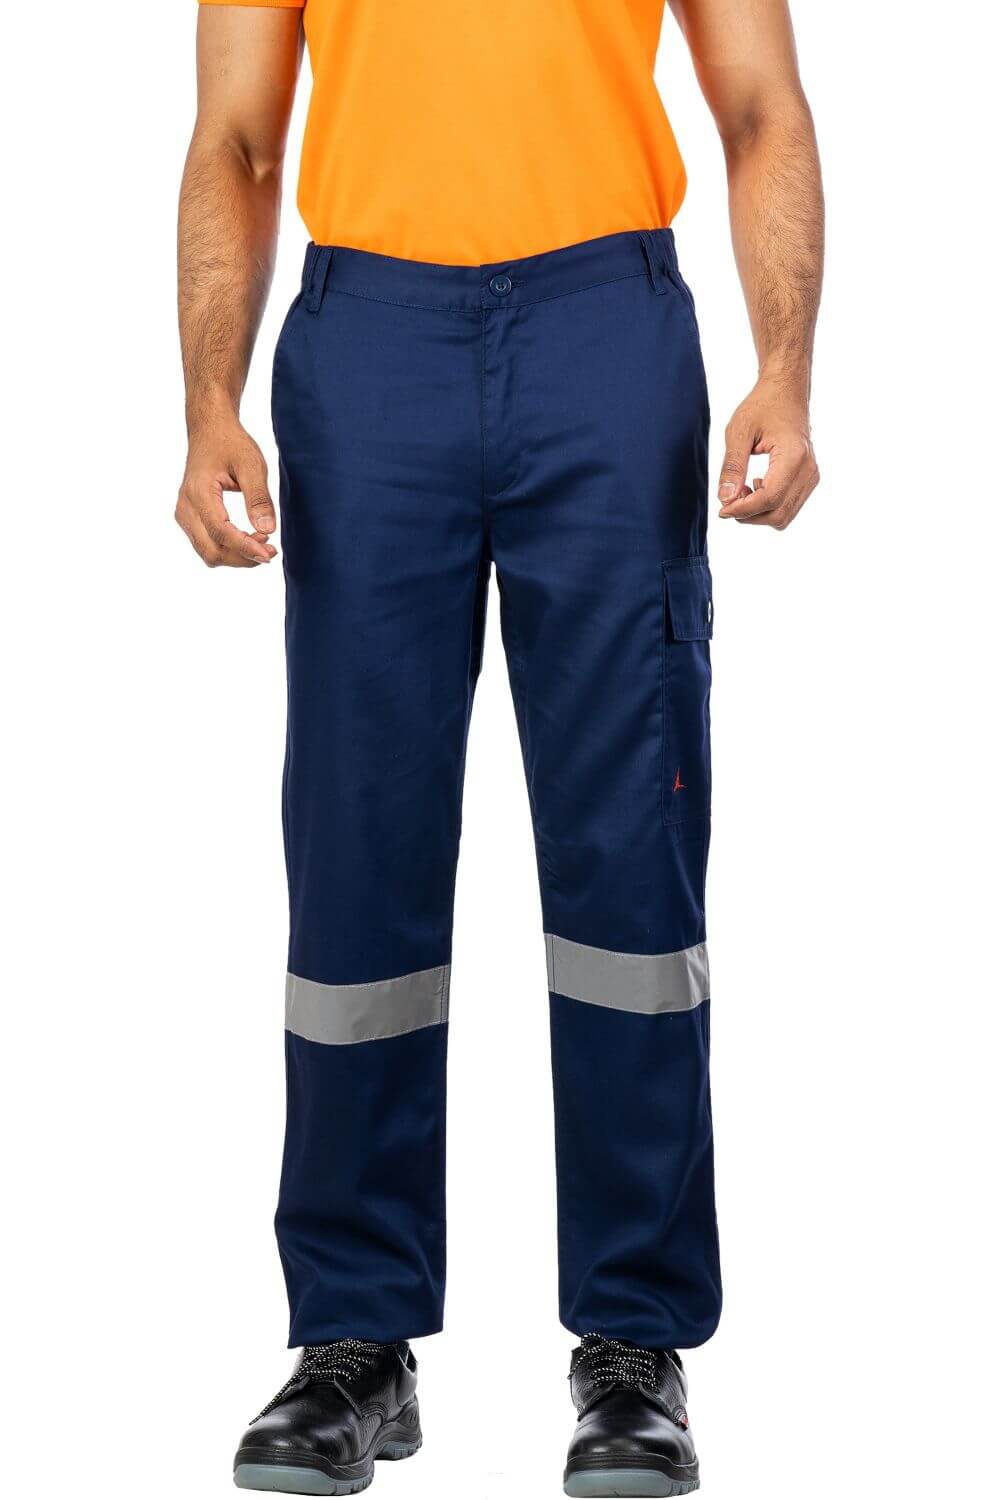 EN 20471 certified reflective tapes light weight industrial trouser.